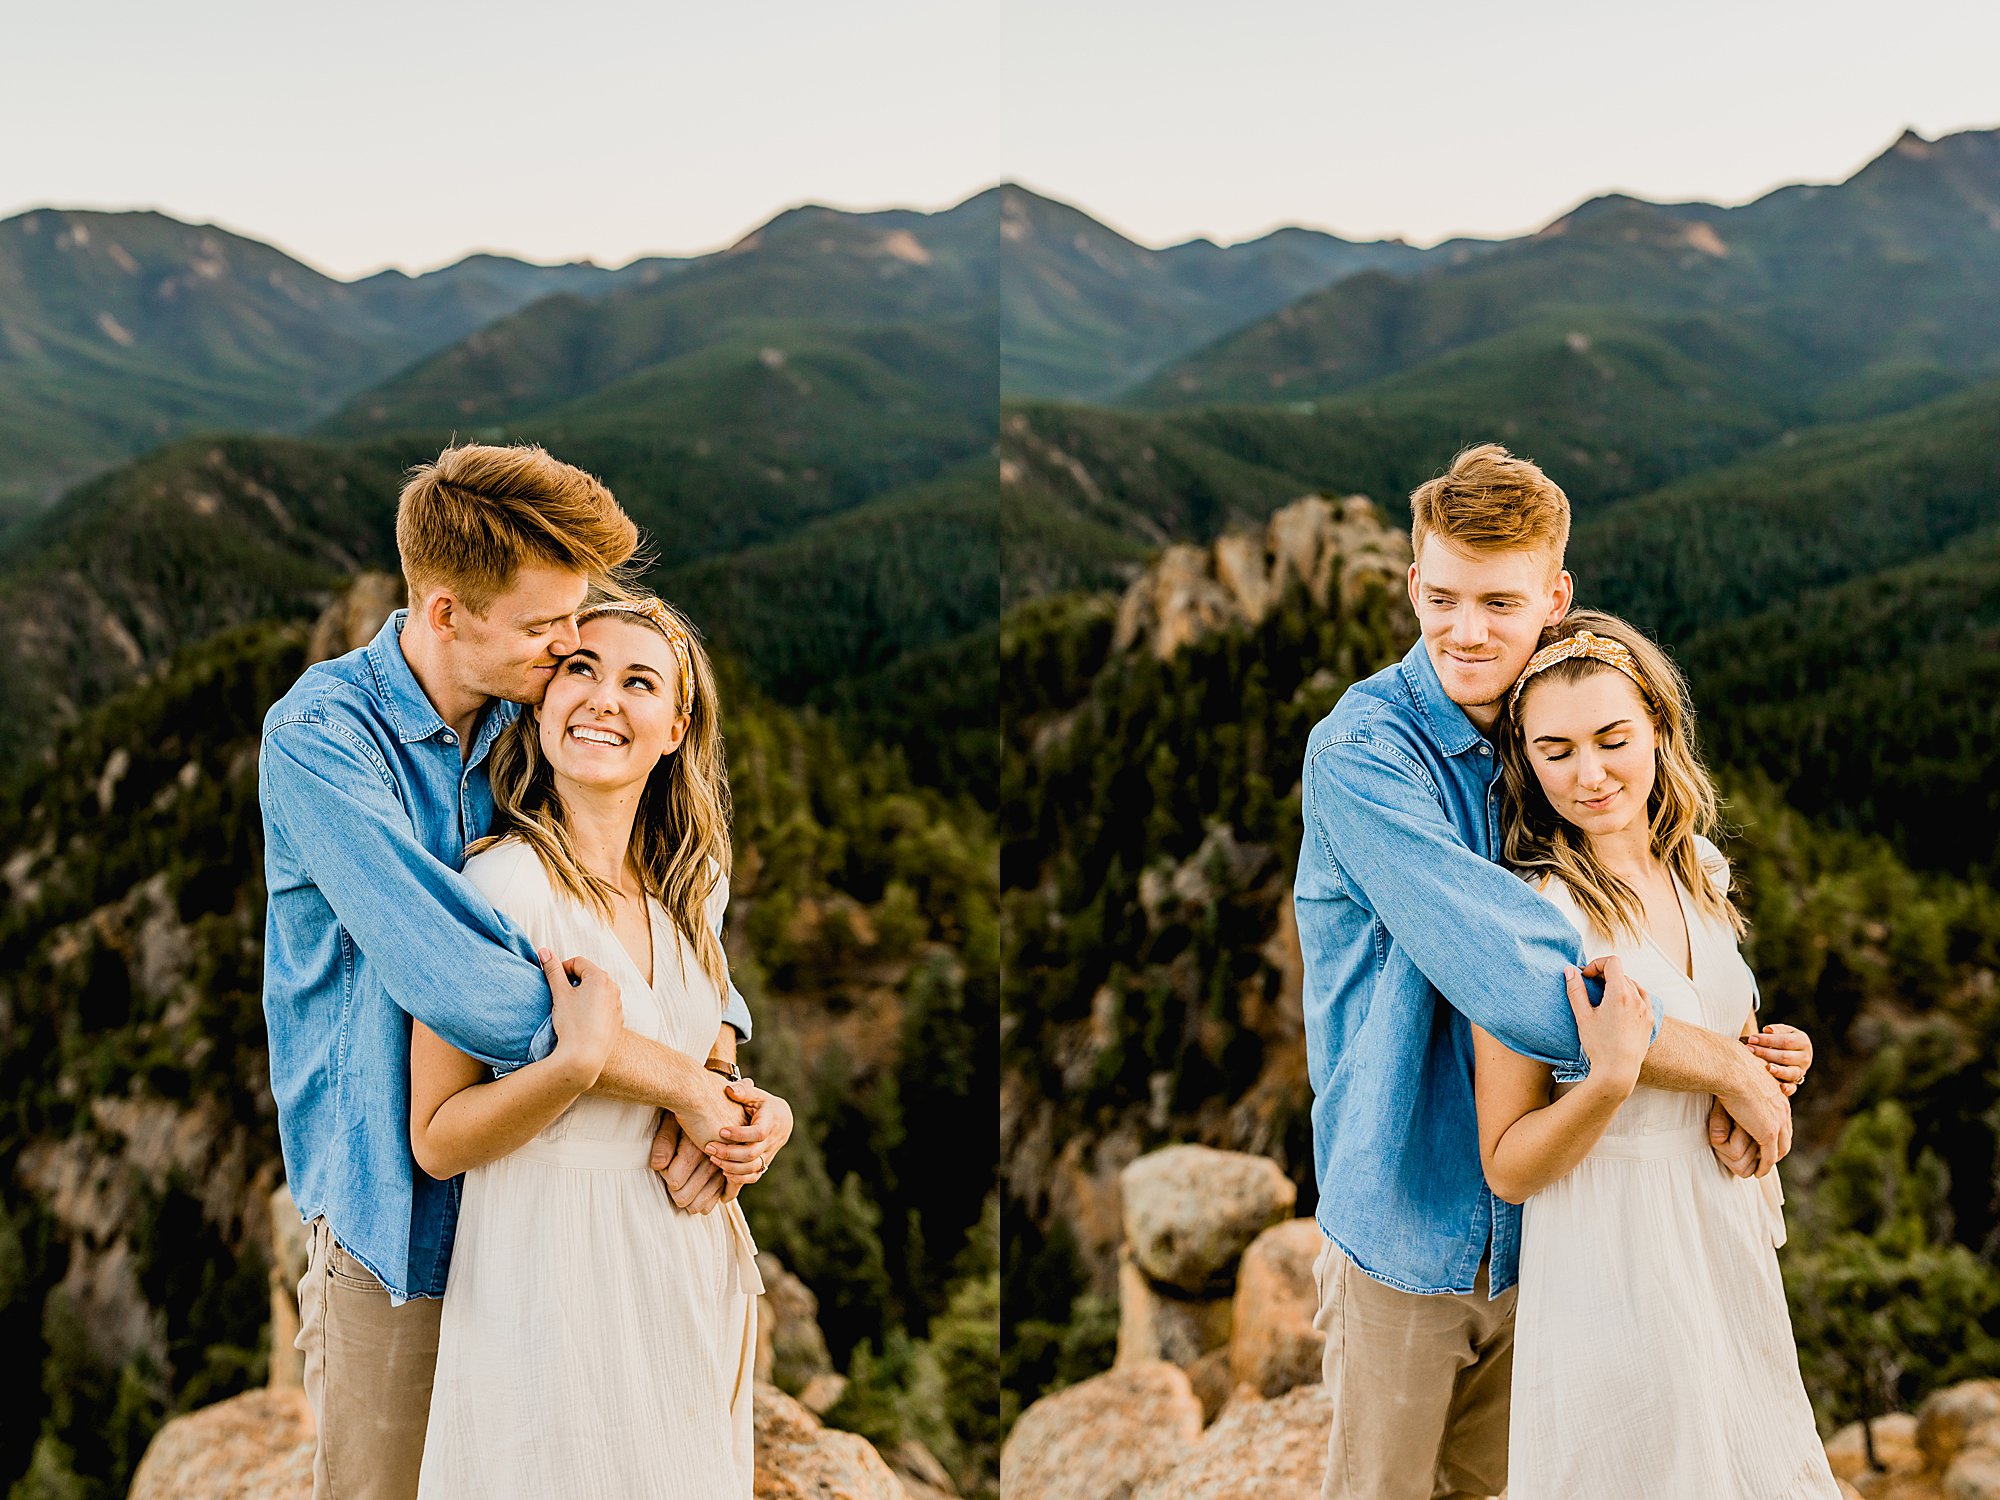 colorado mountain engagement photos, photographer captures couples hiking engagement photos with beautiful colorado mountain scenery in the background